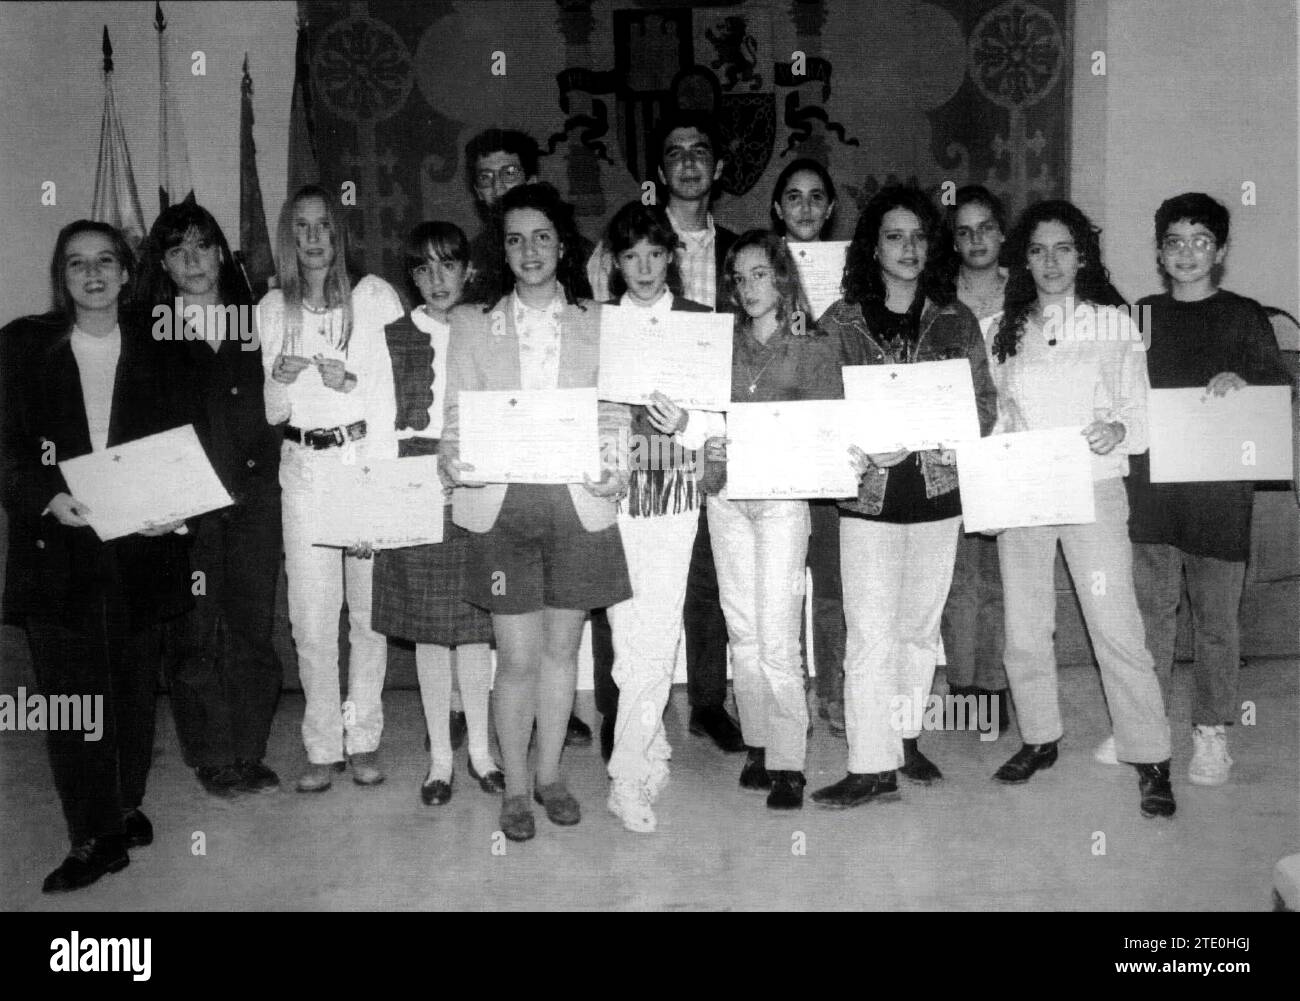 10/18/1993. Presentation of Diplomas to the Collaborating Volunteers of the Little Flag party in Alicante, in the Europa room of the Meliá hotel. The event was chaired by the president of the Charitable Institution, Rafael Ramón-Borja Sempere, who appears in the photo, accompanied by the Secretary General, Isidro Granados, and the Vice Presidents, Joan Suay and Juan José Rovira. Credit: Album / Archivo ABC / José Aniorte Stock Photo